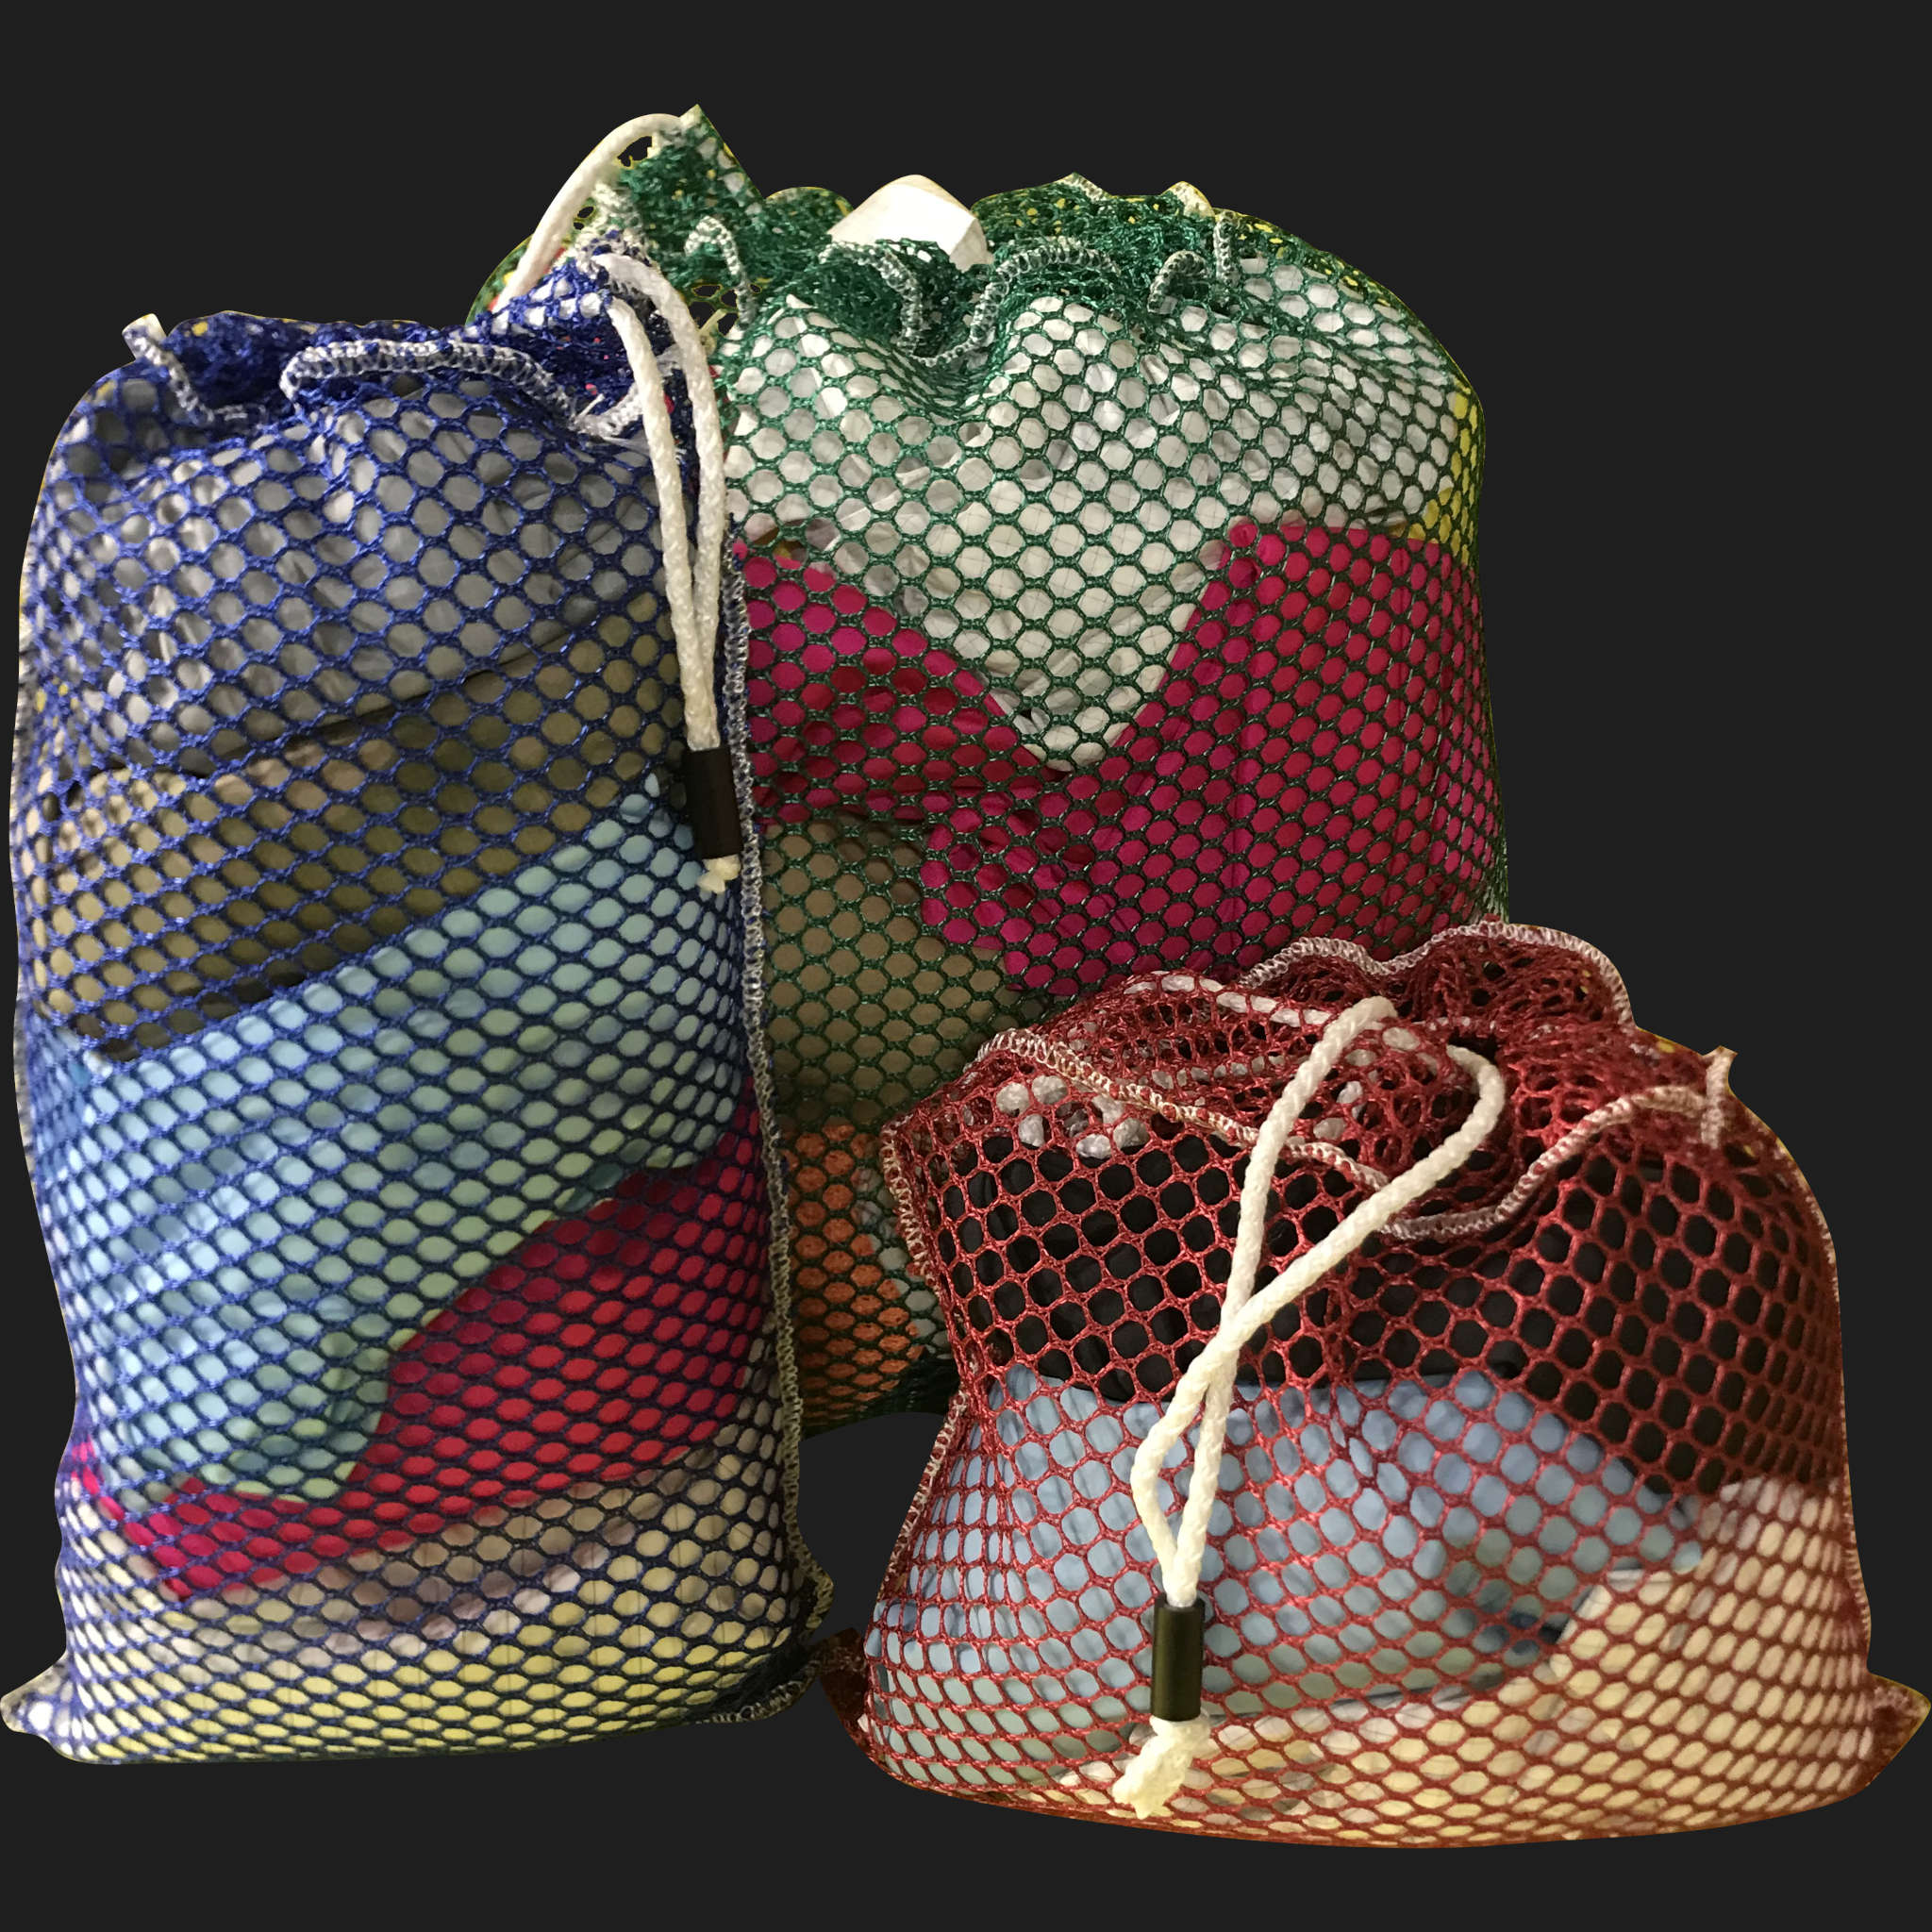 22" x 42" Customized Mesh-Net-Laundry Bags Heavy Duty with Cord and barrellock closure